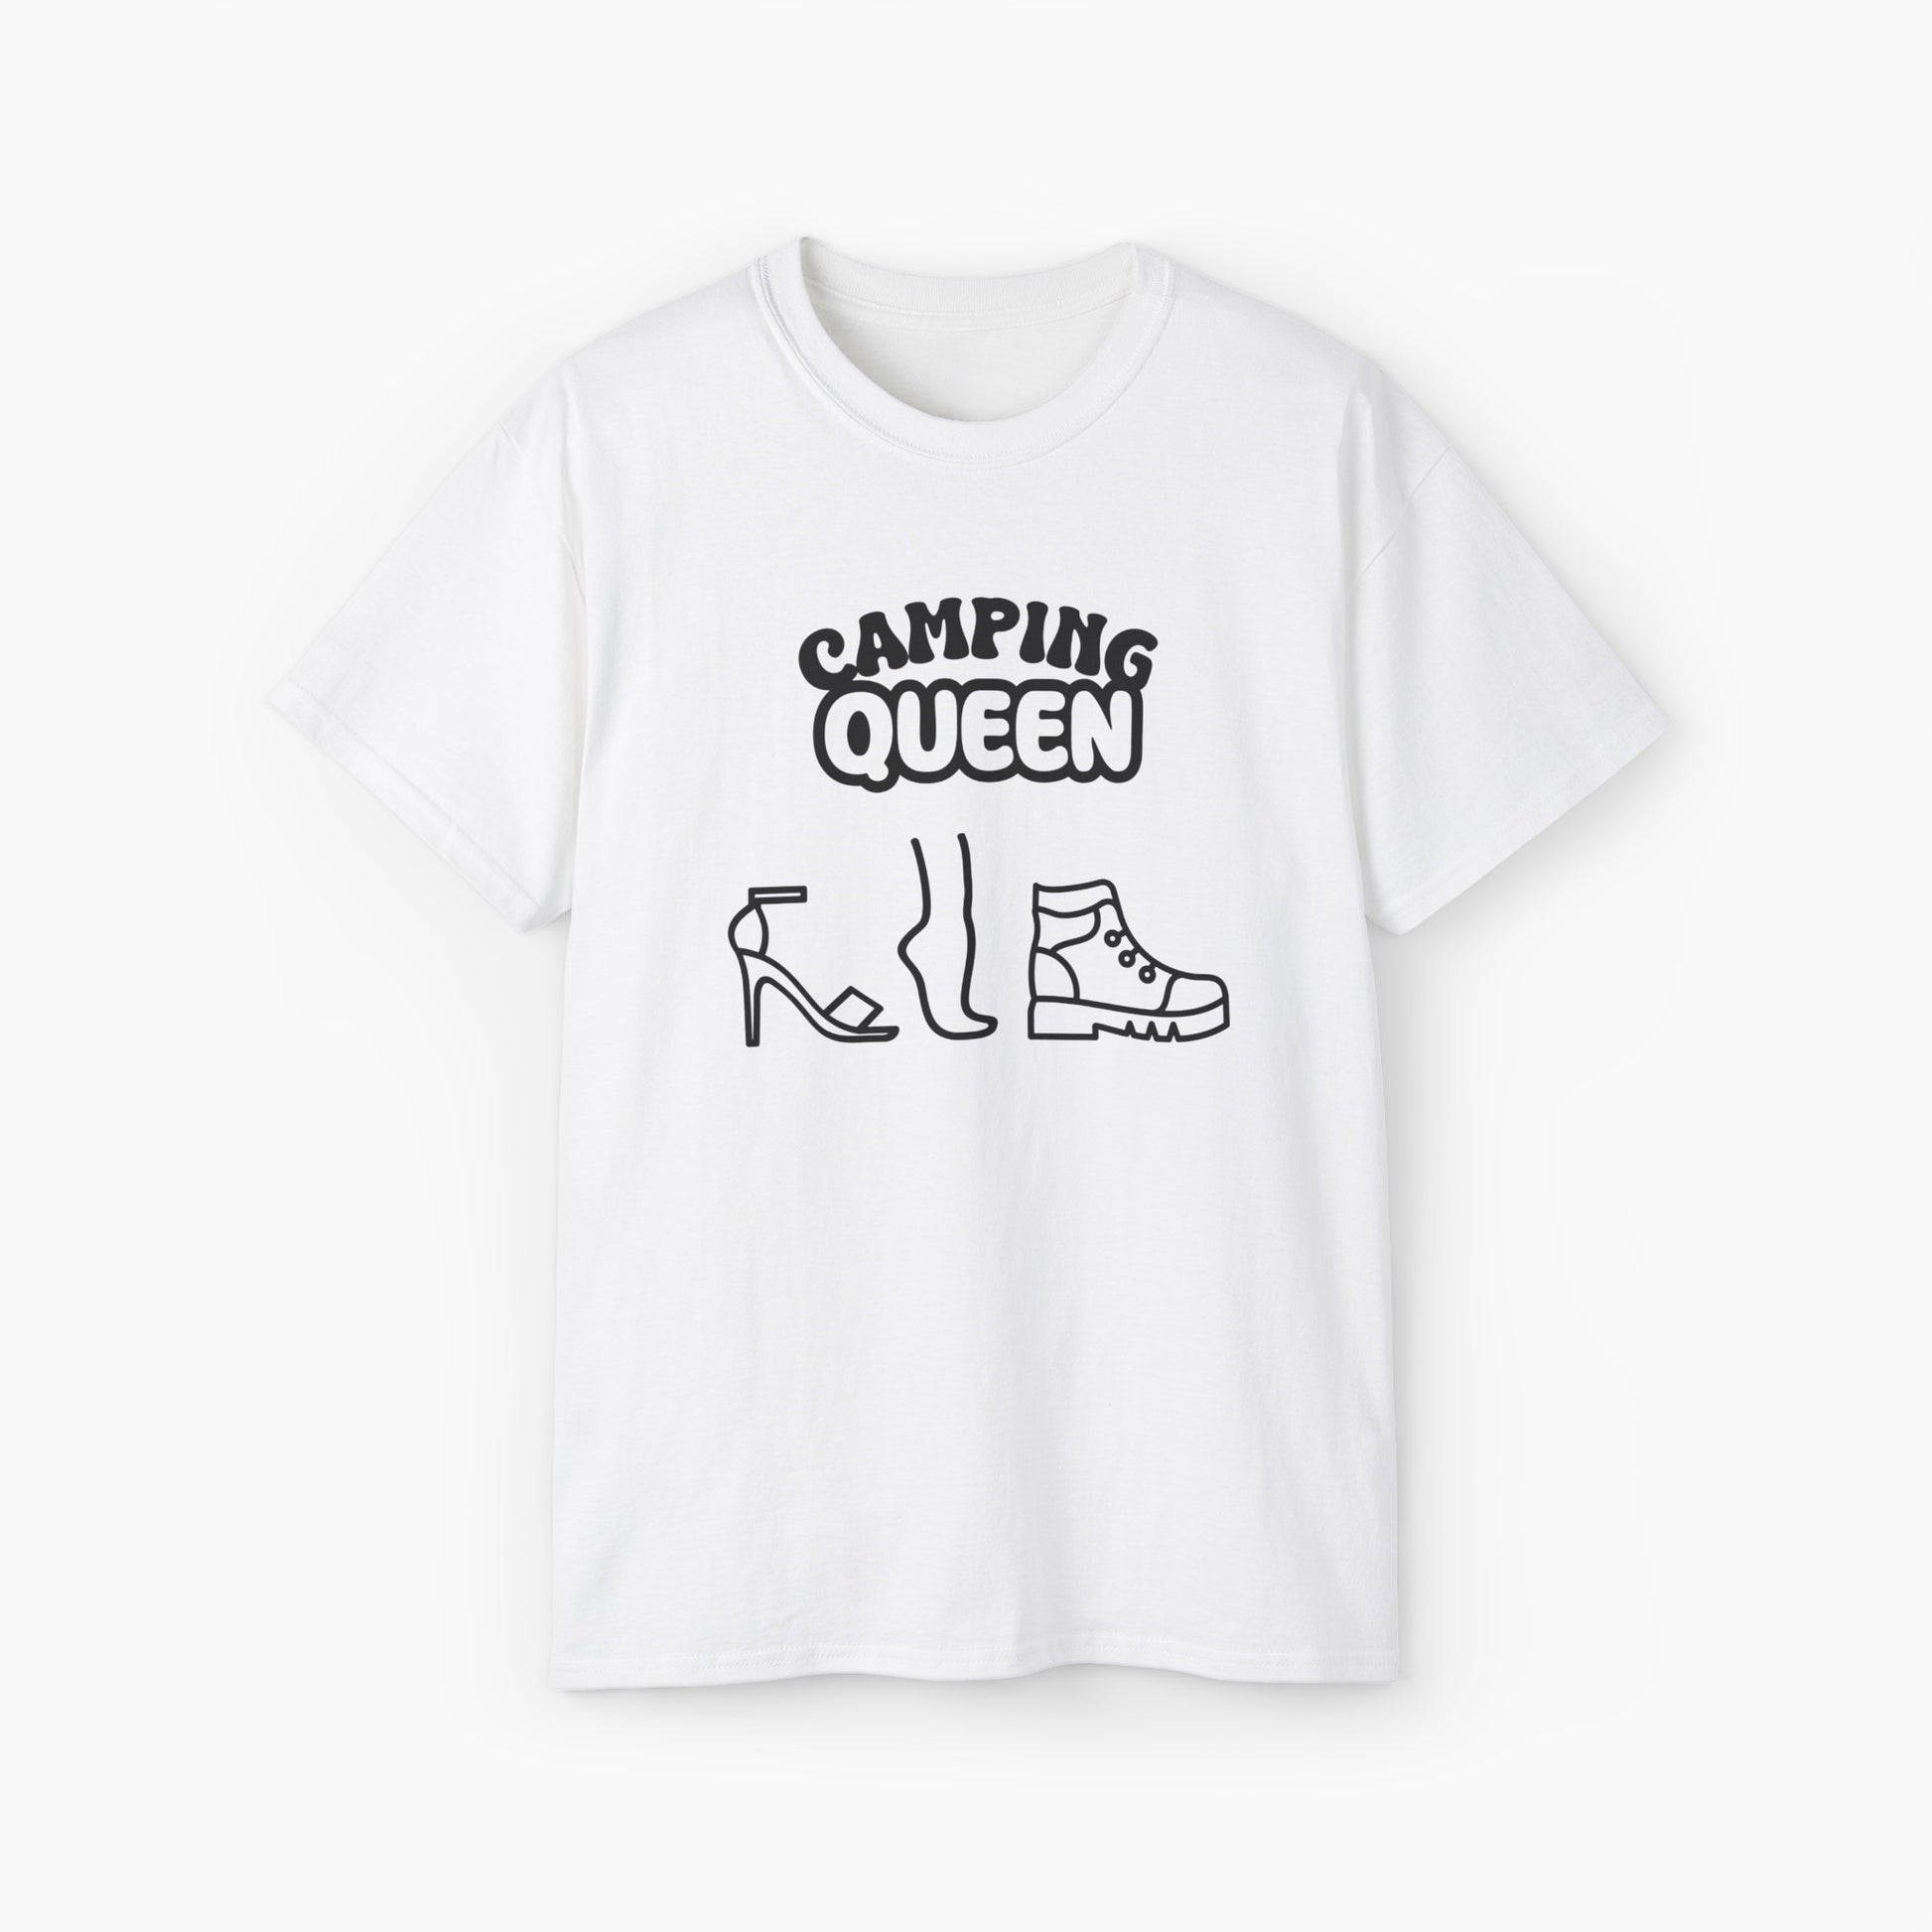 White t-shirt with 'Camping Queen' text, illustrated with a high heel, a foot, and a boot, on a plain background.